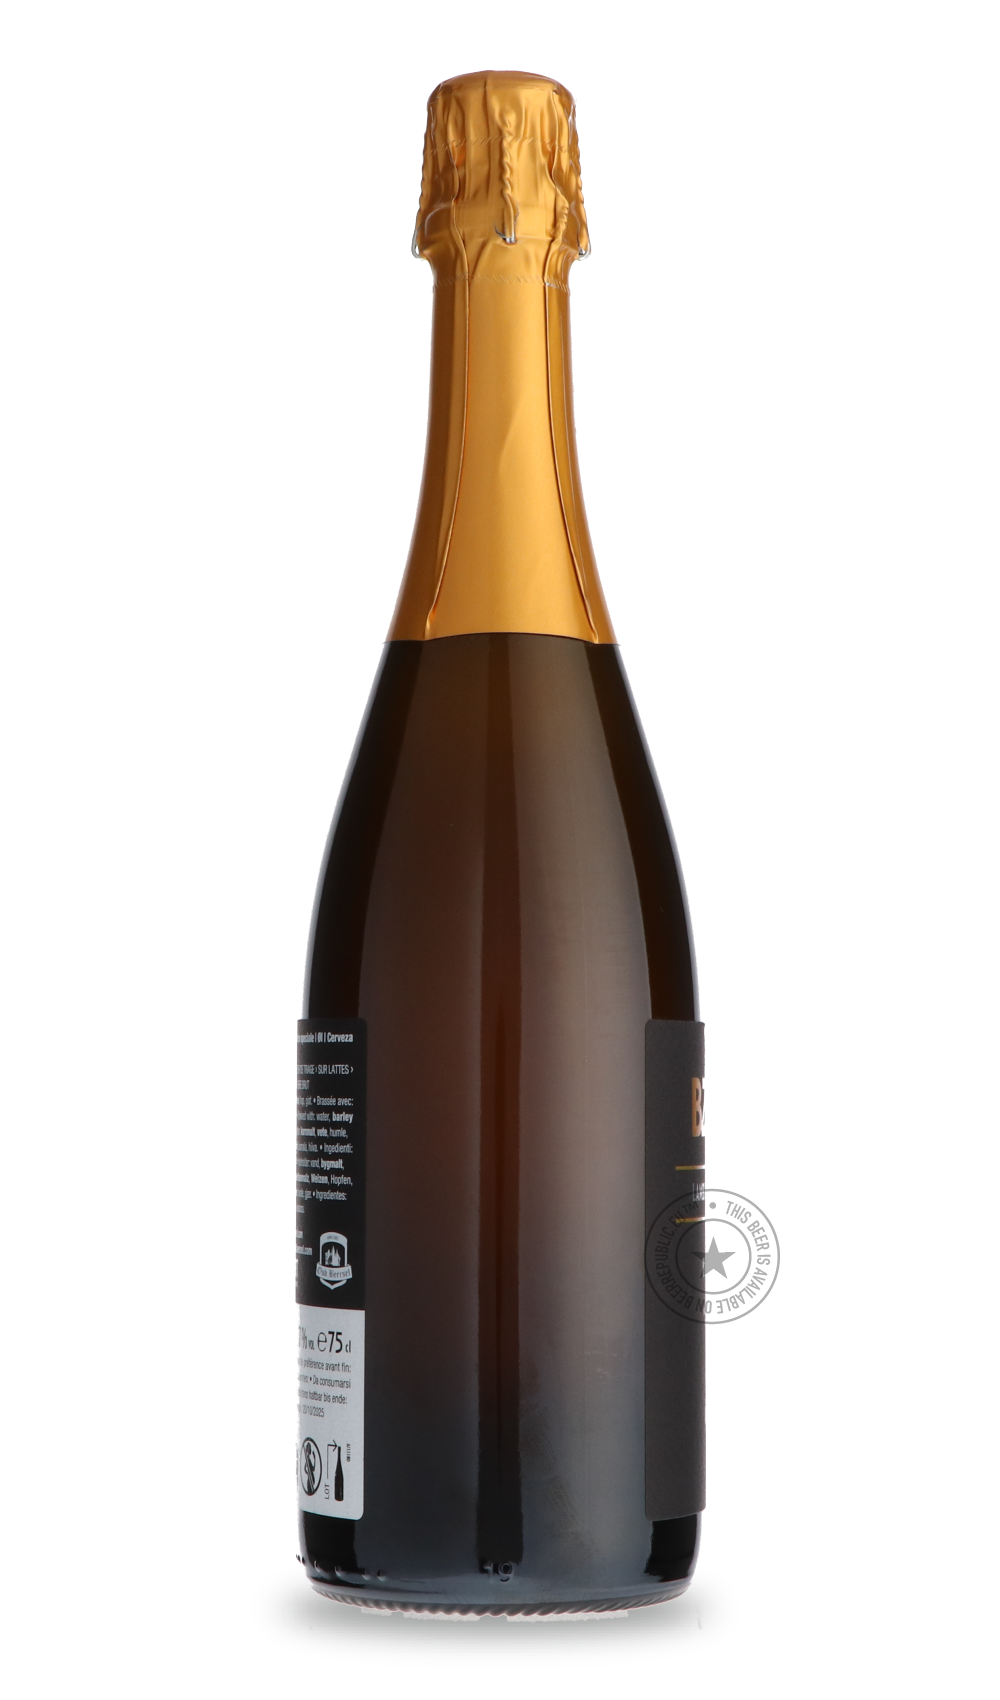 -Oud Beersel- Bzart Lambiek Millésime 2018-Sour / Wild & Fruity- Only @ Beer Republic - The best online beer store for American & Canadian craft beer - Buy beer online from the USA and Canada - Bier online kopen - Amerikaans bier kopen - Craft beer store - Craft beer kopen - Amerikanisch bier kaufen - Bier online kaufen - Acheter biere online - IPA - Stout - Porter - New England IPA - Hazy IPA - Imperial Stout - Barrel Aged - Barrel Aged Imperial Stout - Brown - Dark beer - Blond - Blonde - Pilsner - Lager 